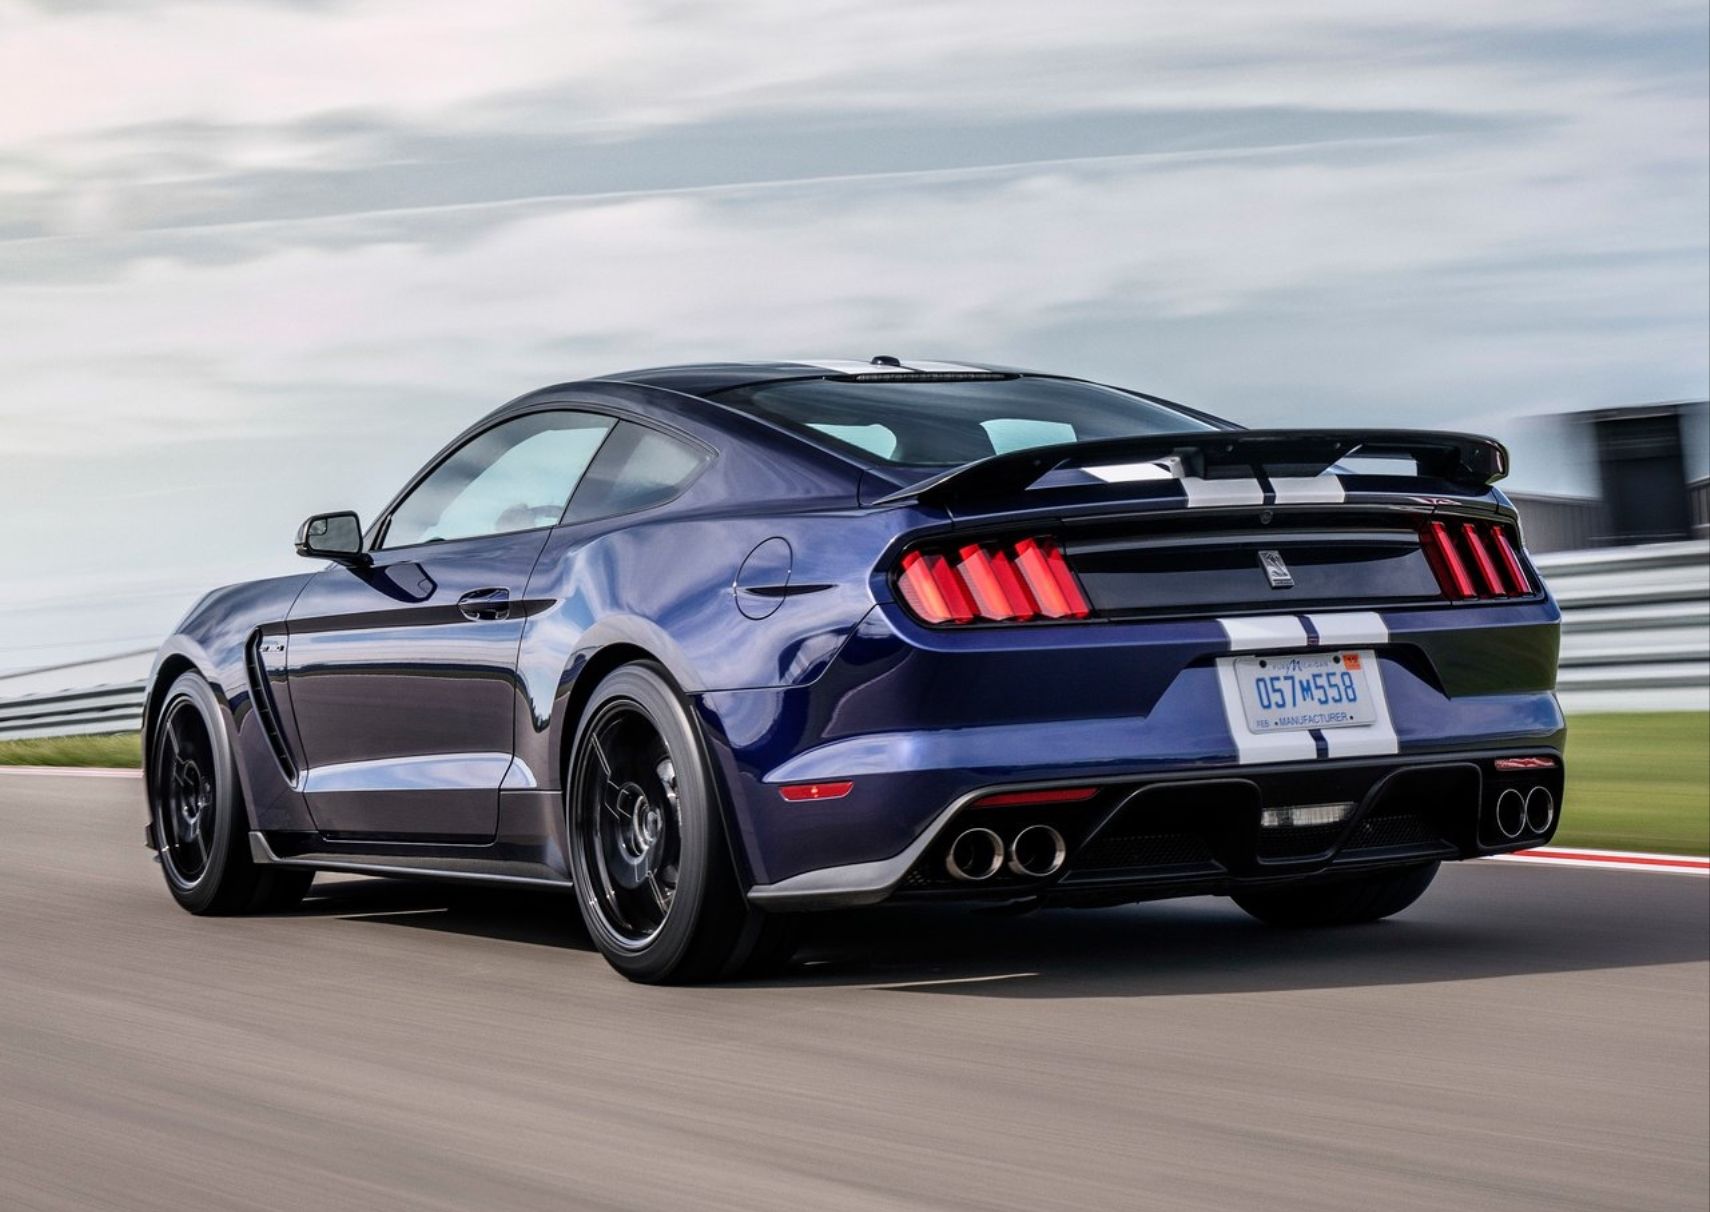 2020 Shelby GT350 Rear Quarter View Blue And White Stripes